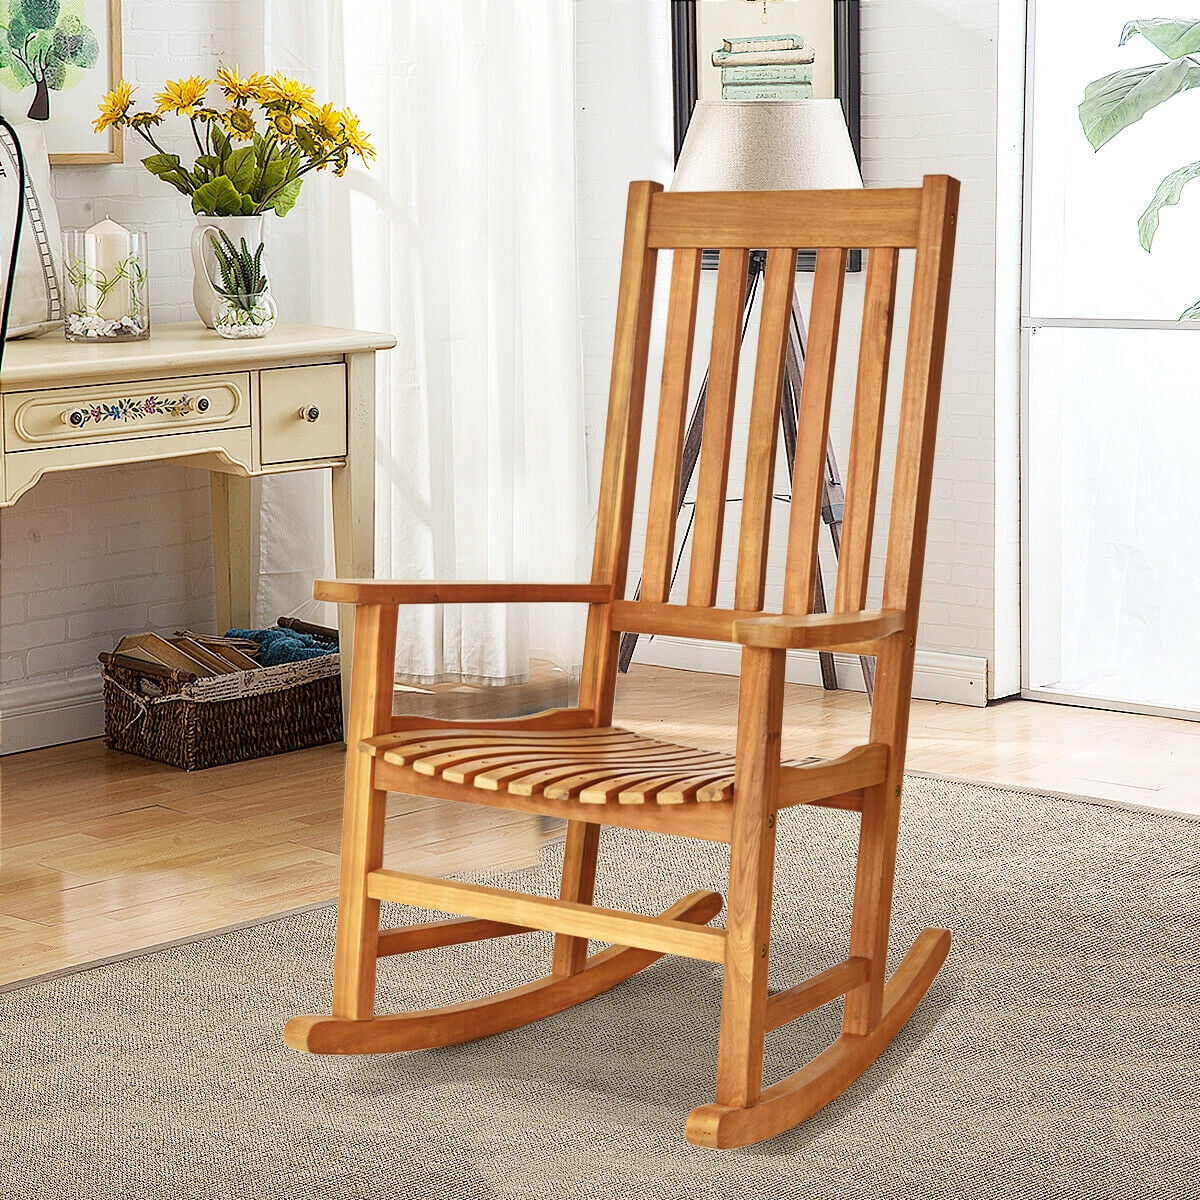 Is This the Most Comfortable Rocking Chair: Why You Need the Cambridge Casual Teak Rocker